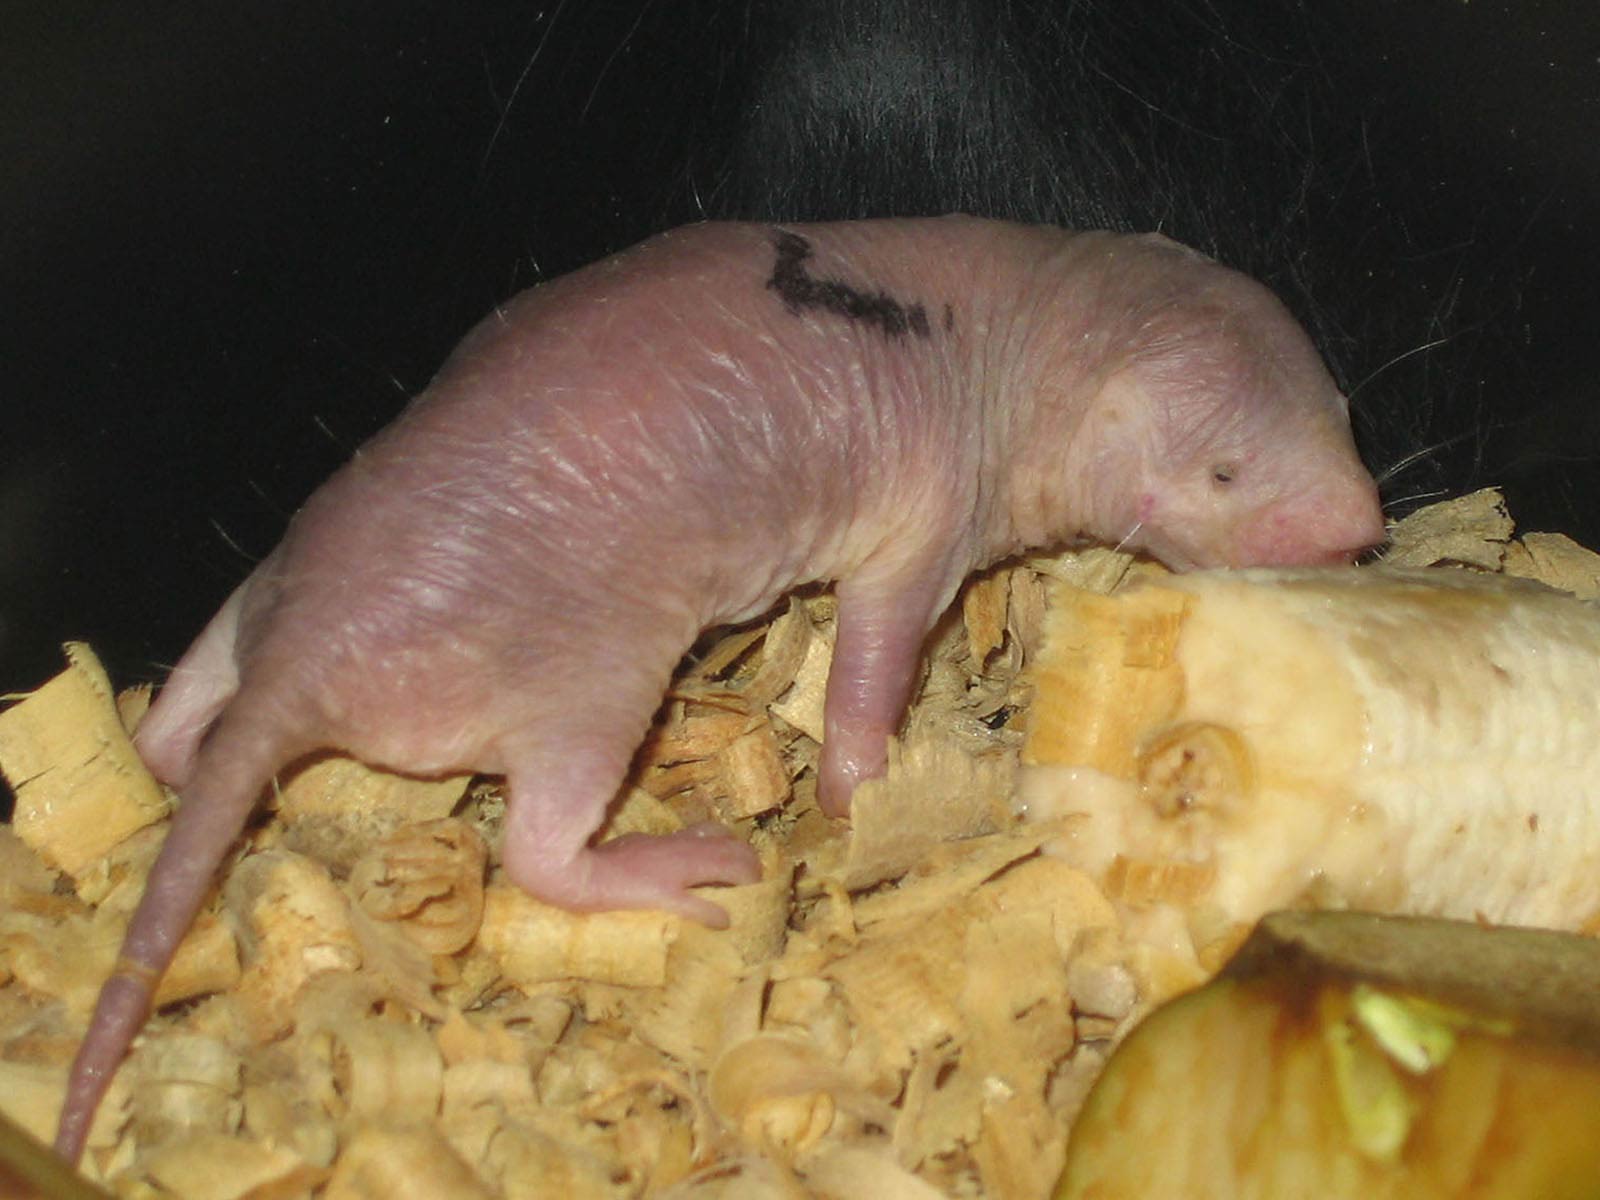 free Naked Mole Rat wallpaper wallpapers download